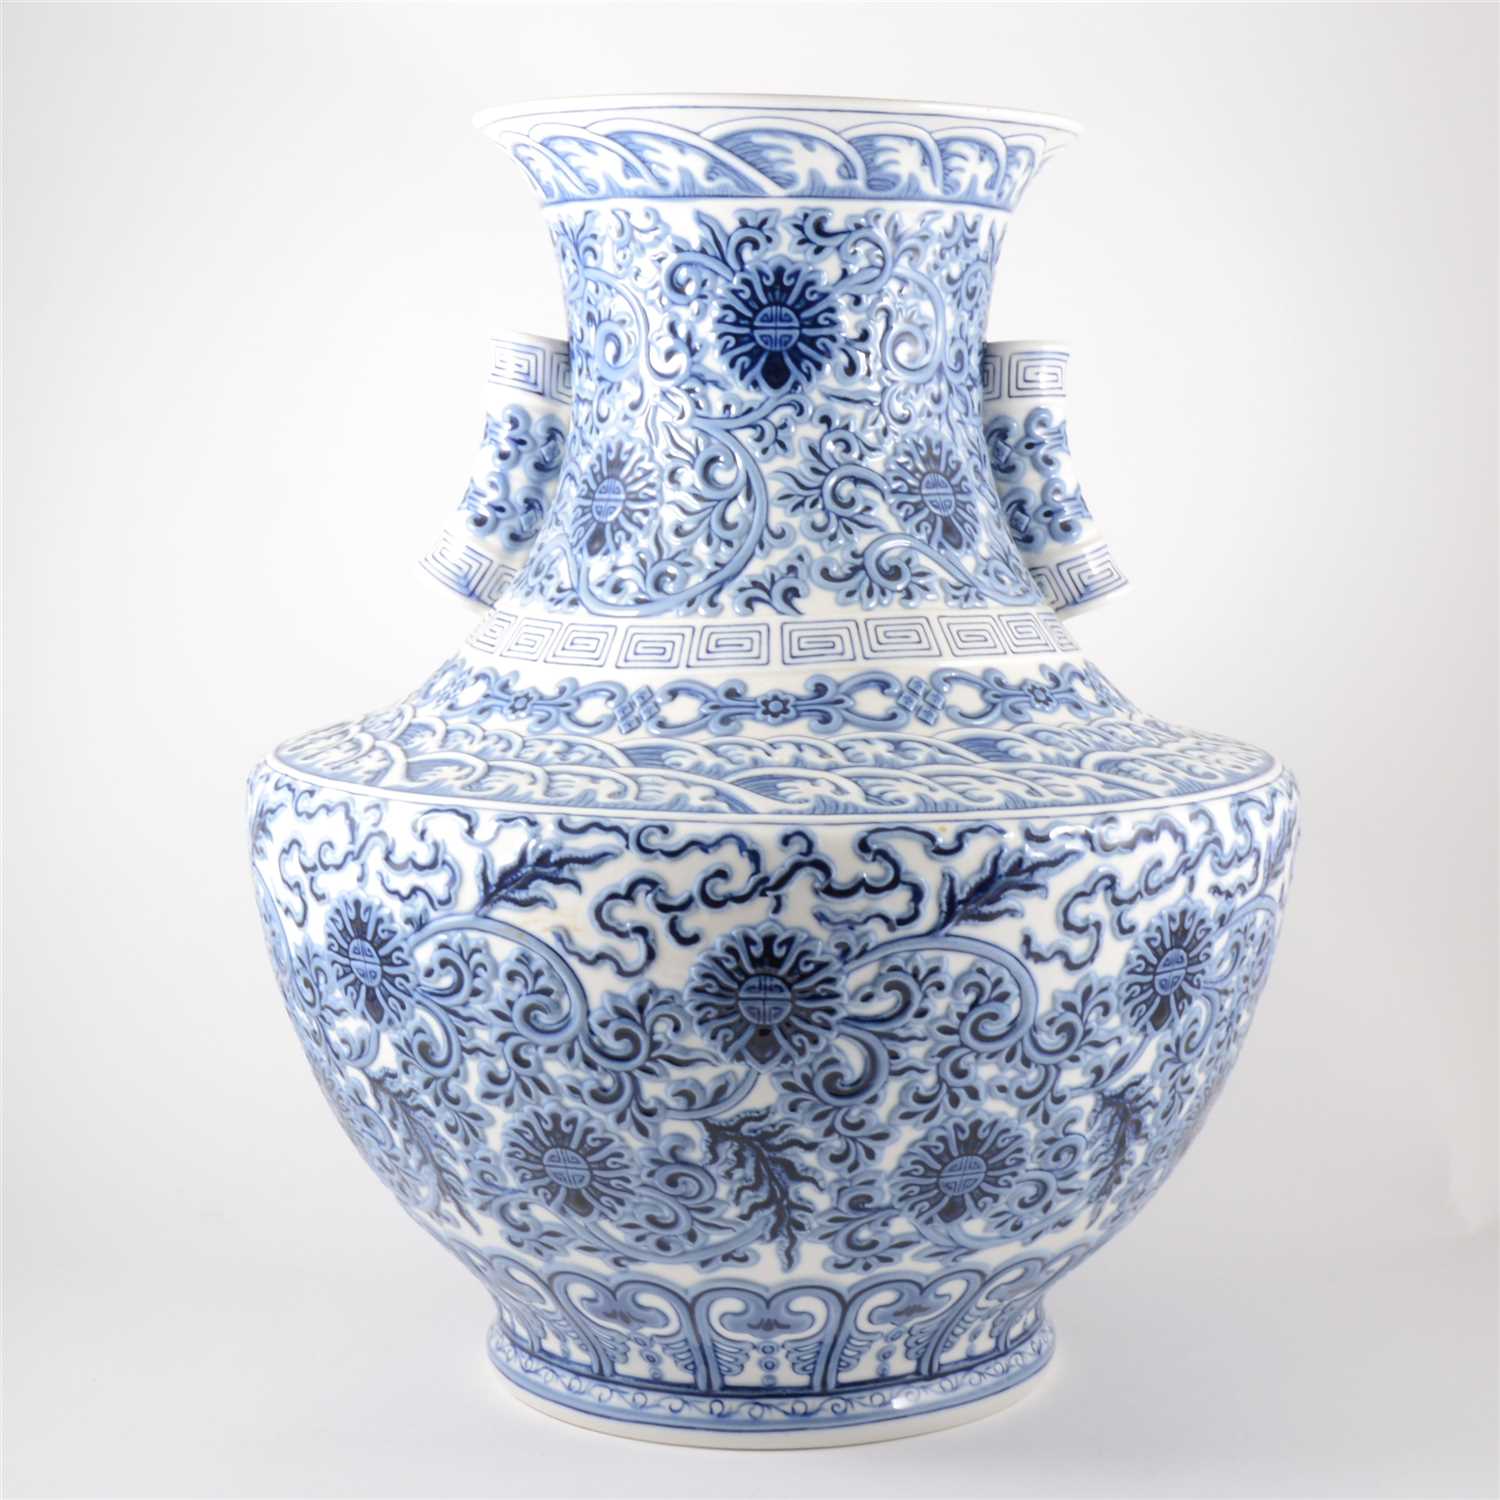 Lot 35 - A large limited edition Blue Empire vase, by Lladró